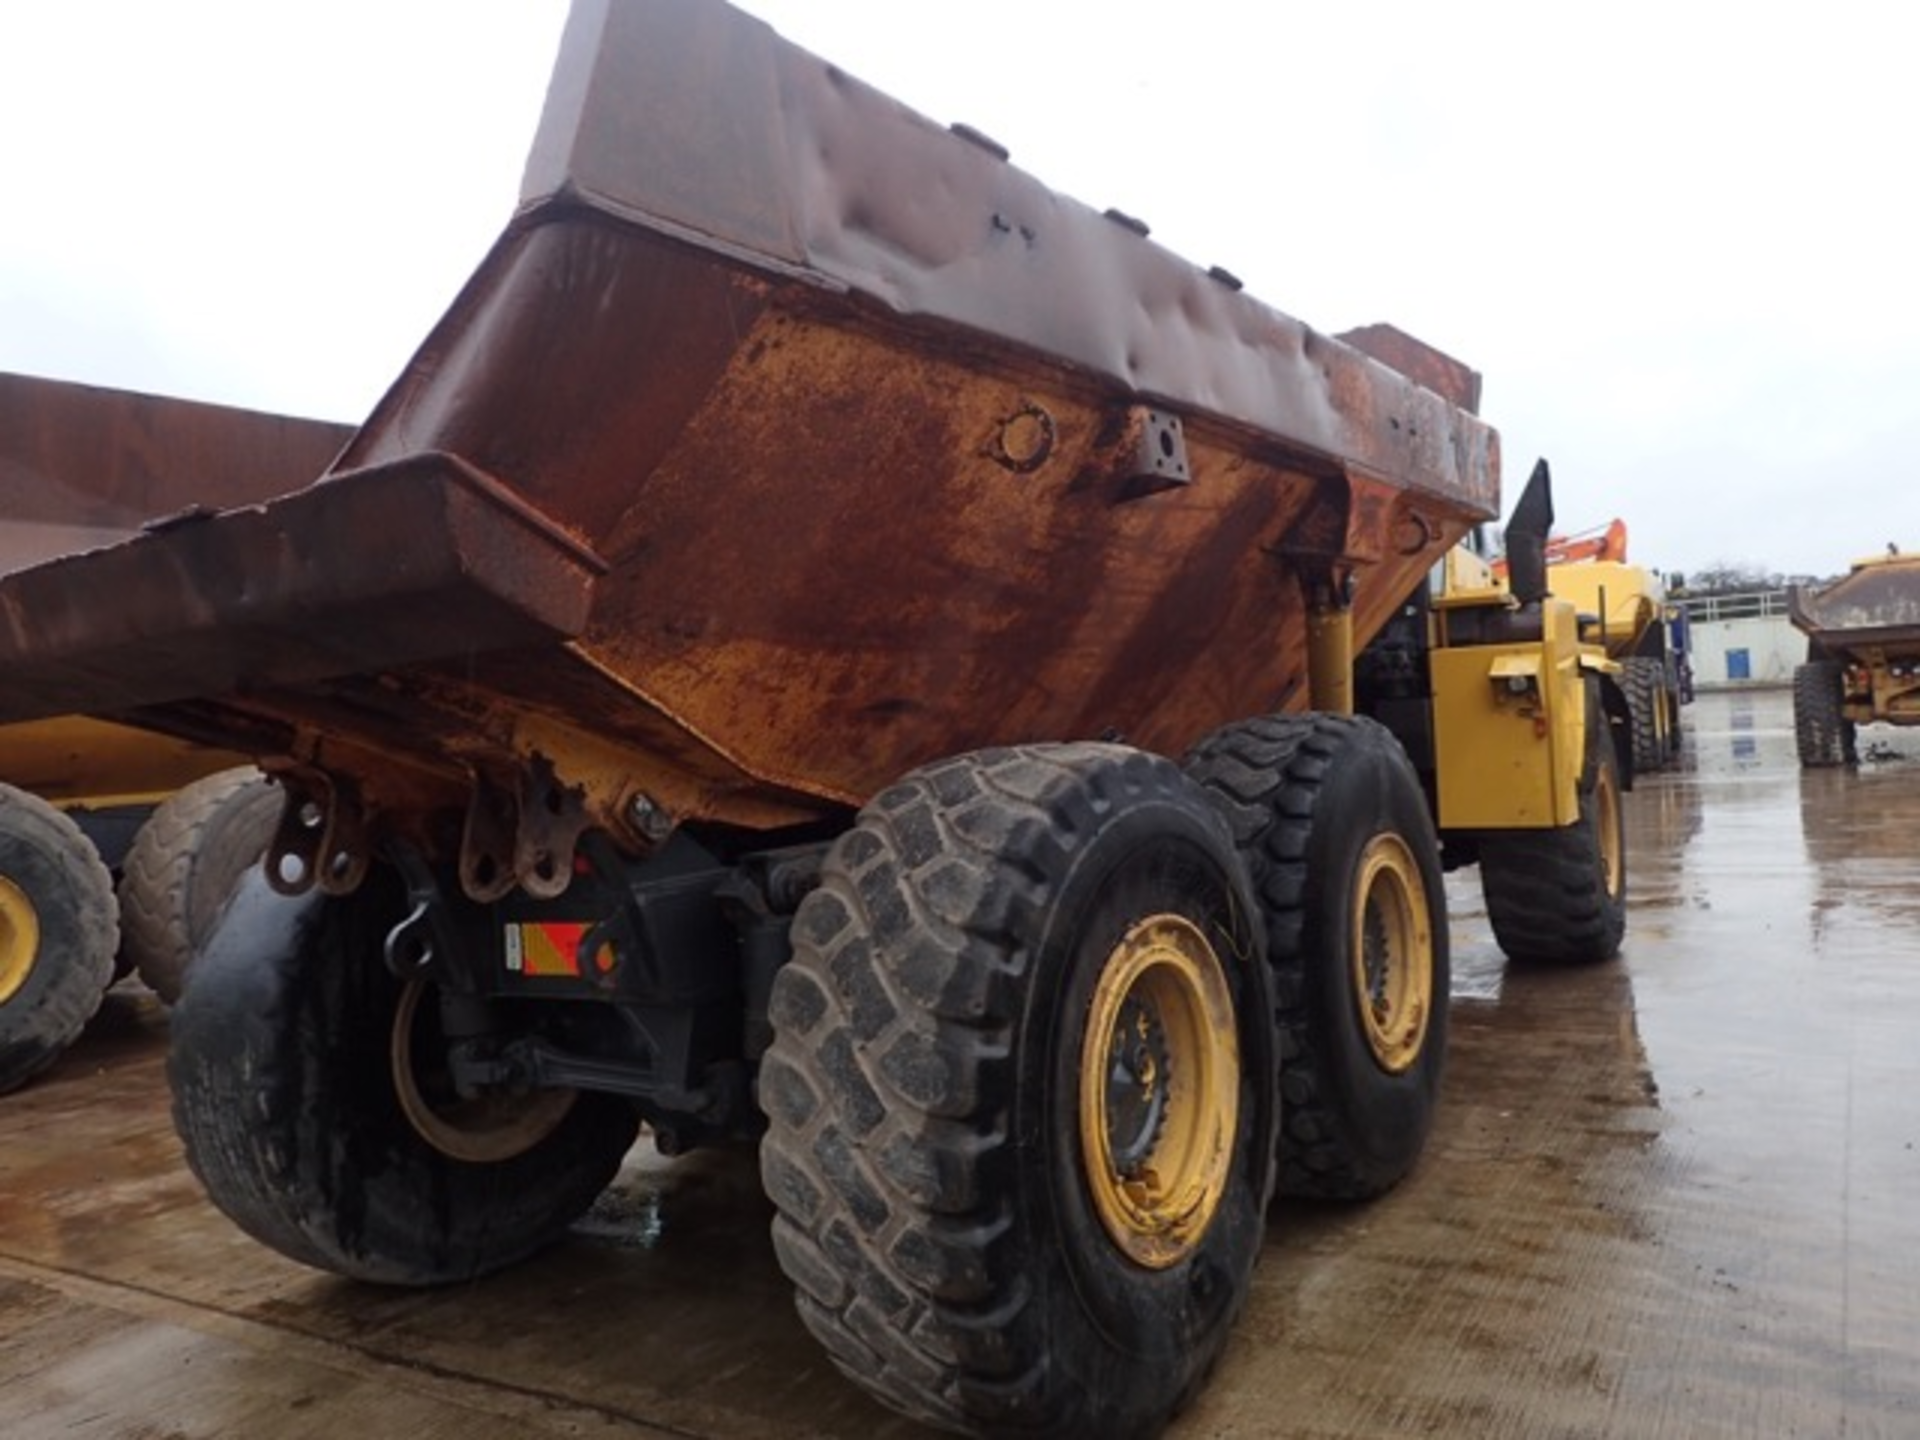 Komatsu HM300-1 30 tonne 6 x 6 wheel articulated dump truck Year: 2005 S/N: 1383 Recorded Hours: - Image 4 of 16